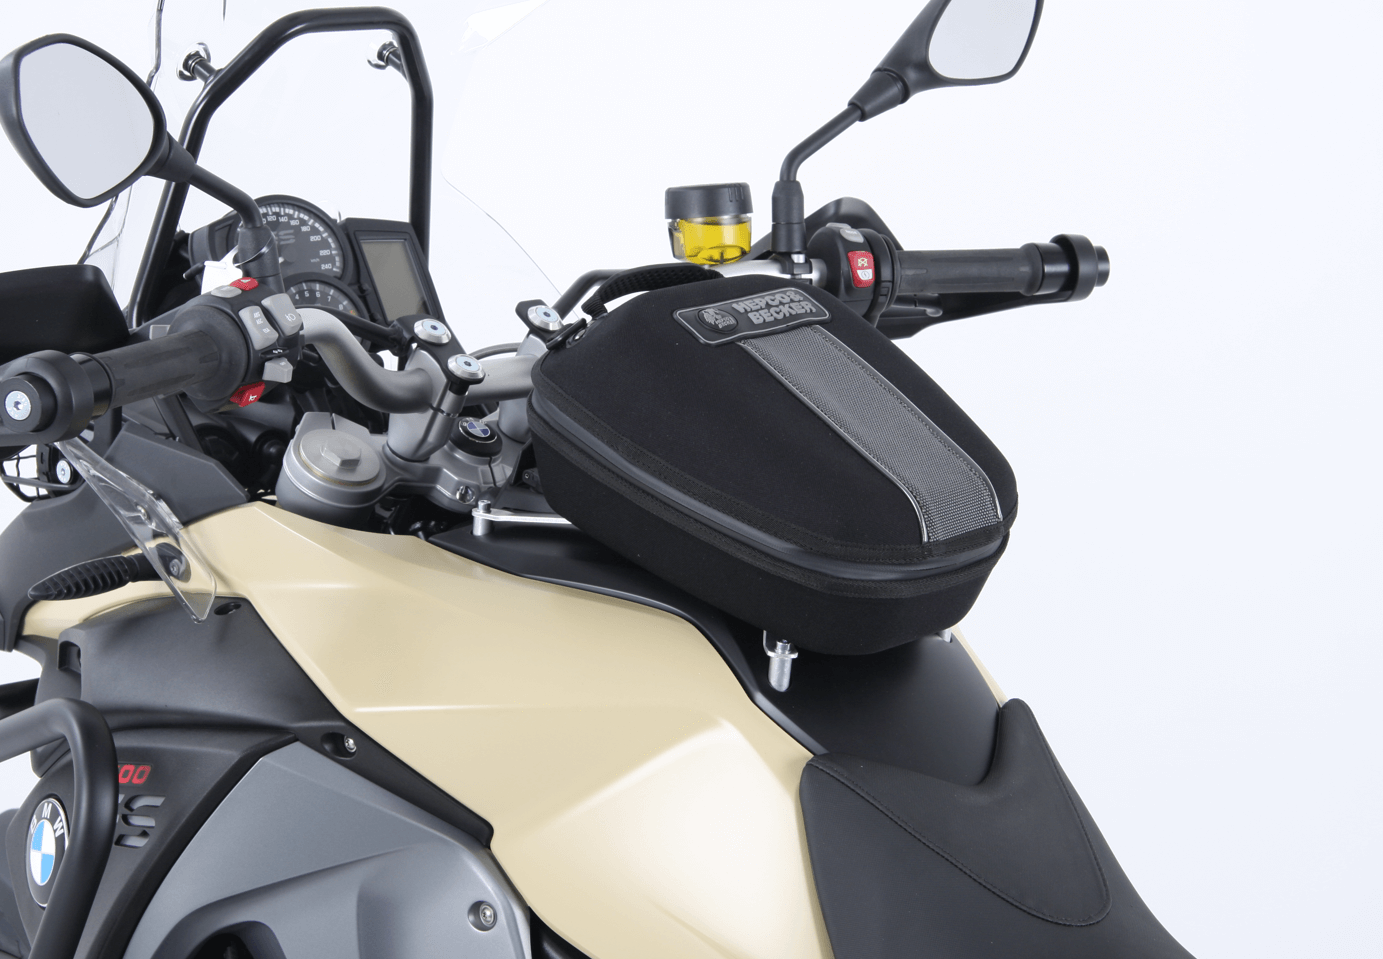 Tankring Lock-it incl. fastener for tankbag for BMW F 800 GS Adventure / F 800 GS (2008-2018) / F 700GS (2012-) / F 650 GS (34 PS Version) (2008-) / G 650 GS (2011-2016) 